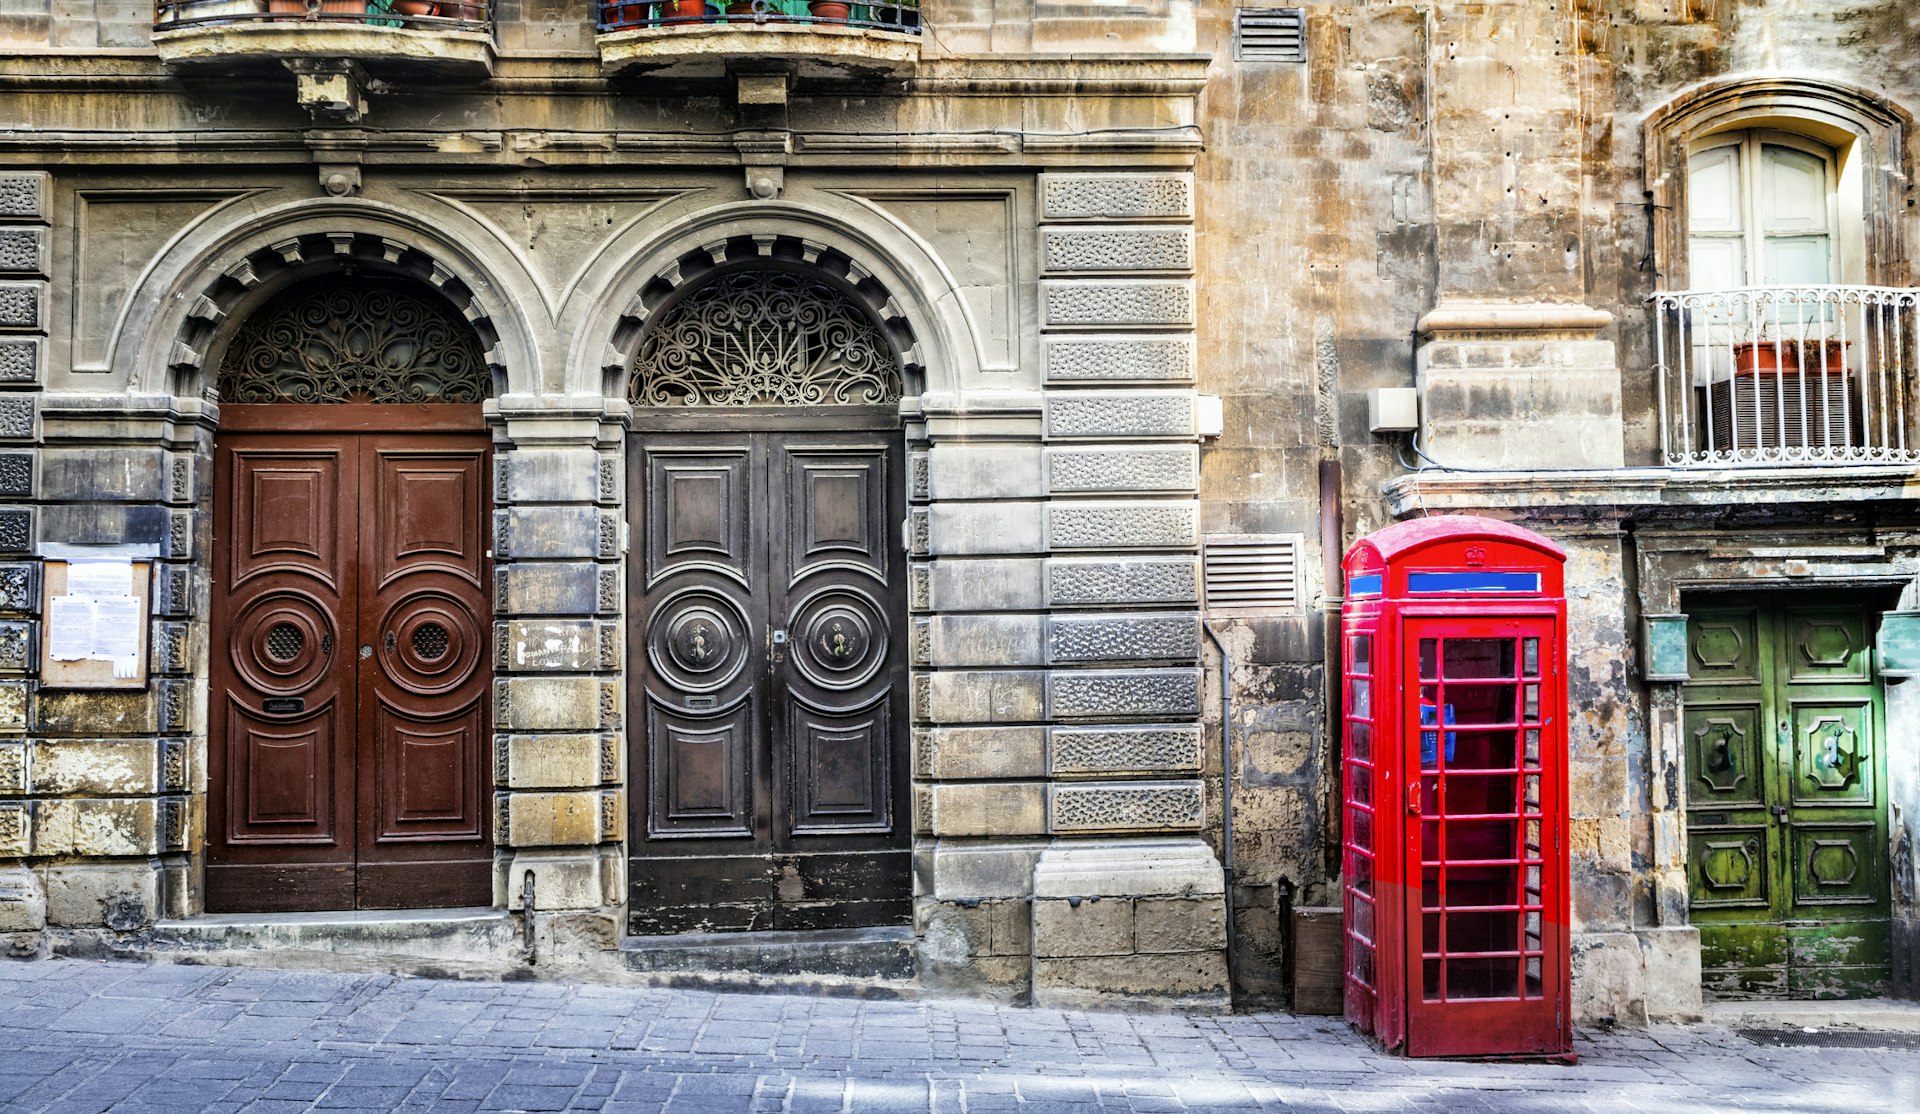 Old streets in Valletta, Malta, with two ornate wooden doors juxtaposed with a bright red phone box.